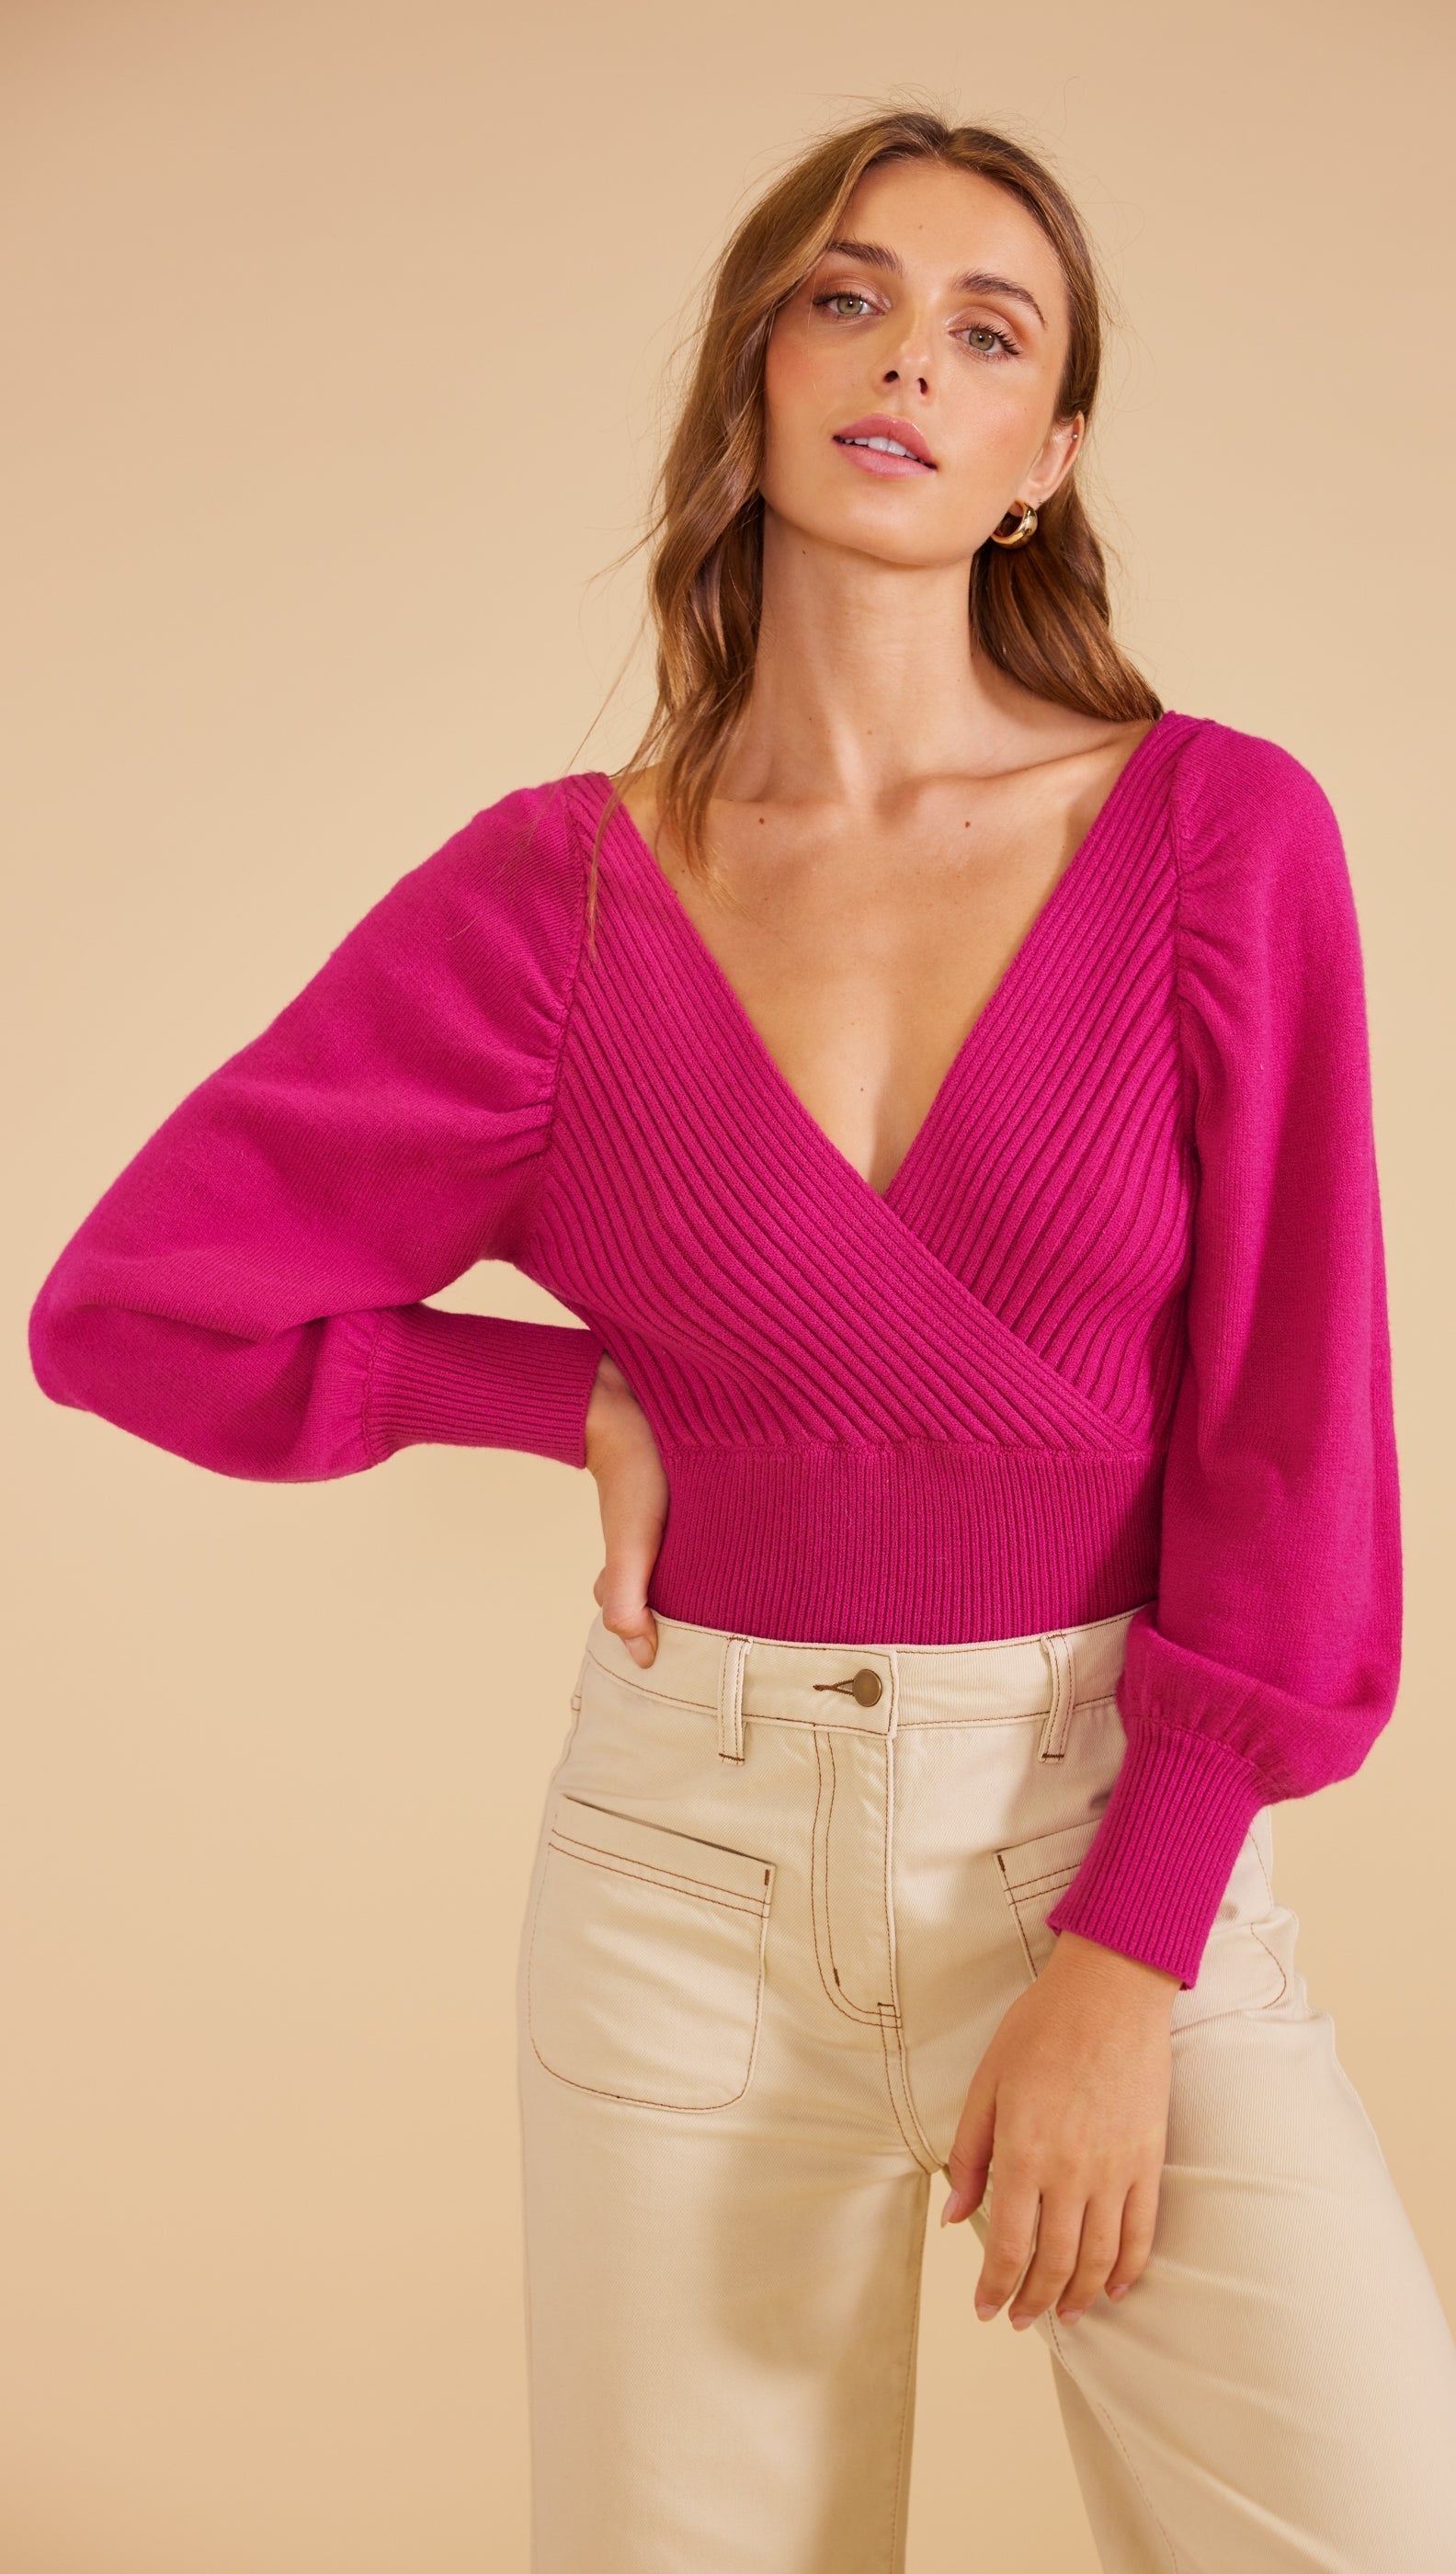 Mango v-neck long sleeve sweater in pink